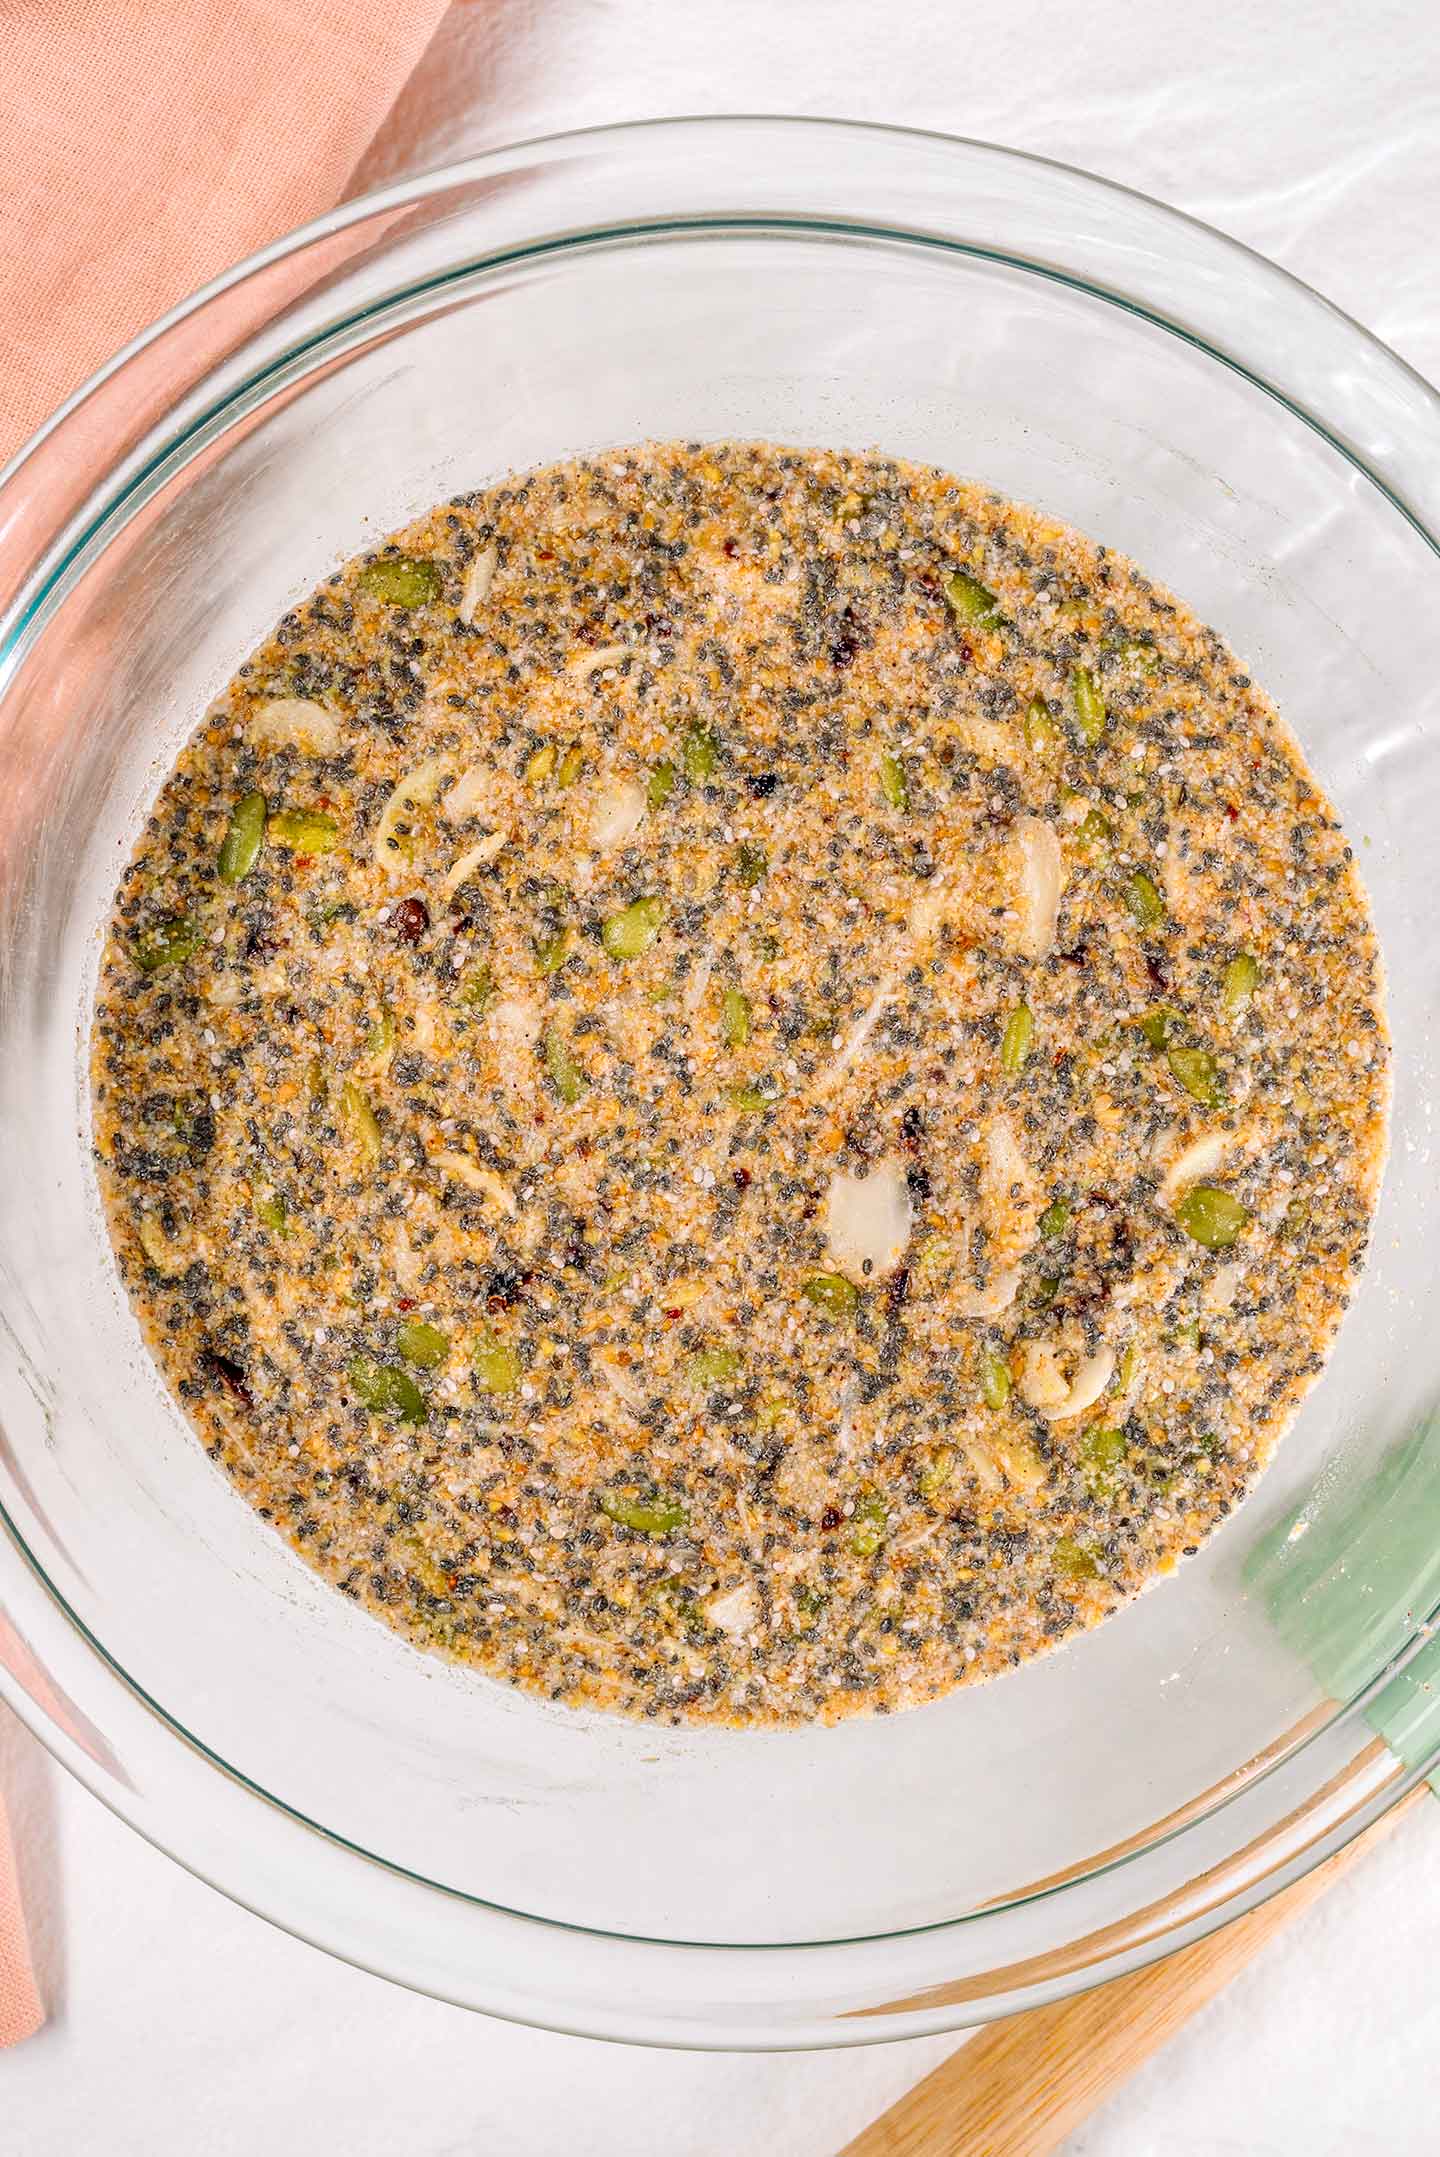 Top down view of the mixture soaking in a bowl. The seeds and almond flour have absorbed all the water.